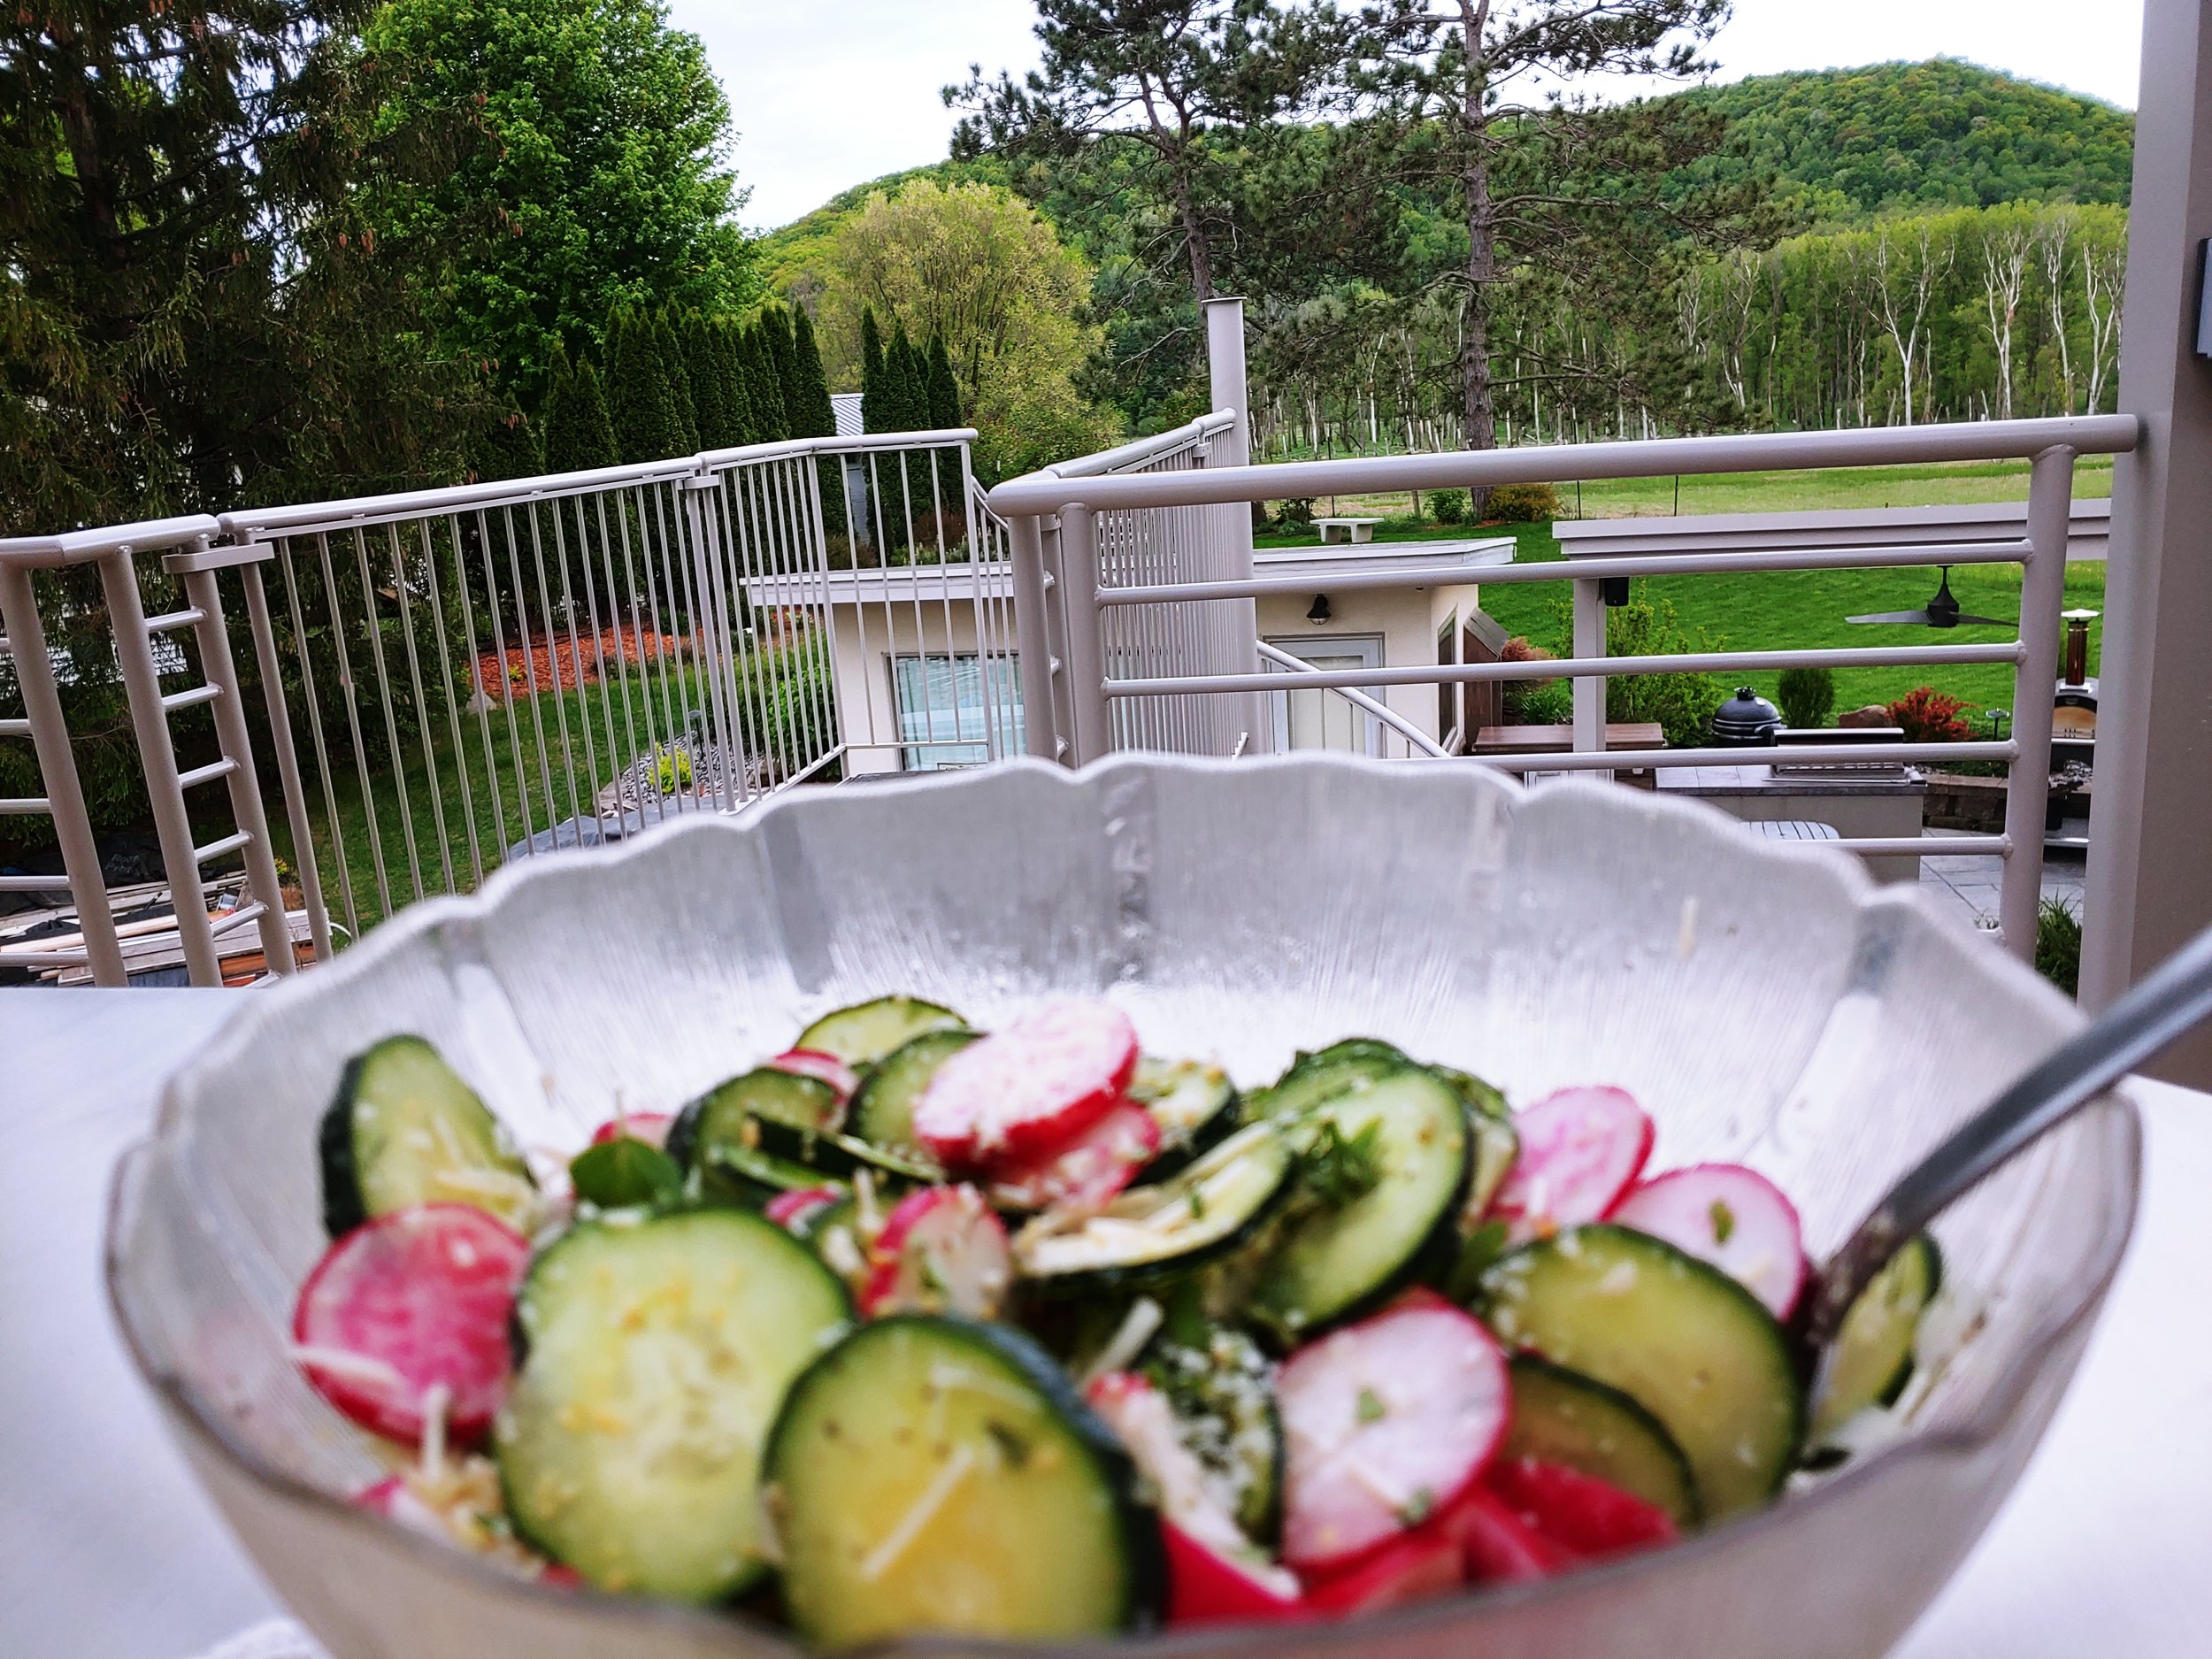 Salad with view 2.jpg